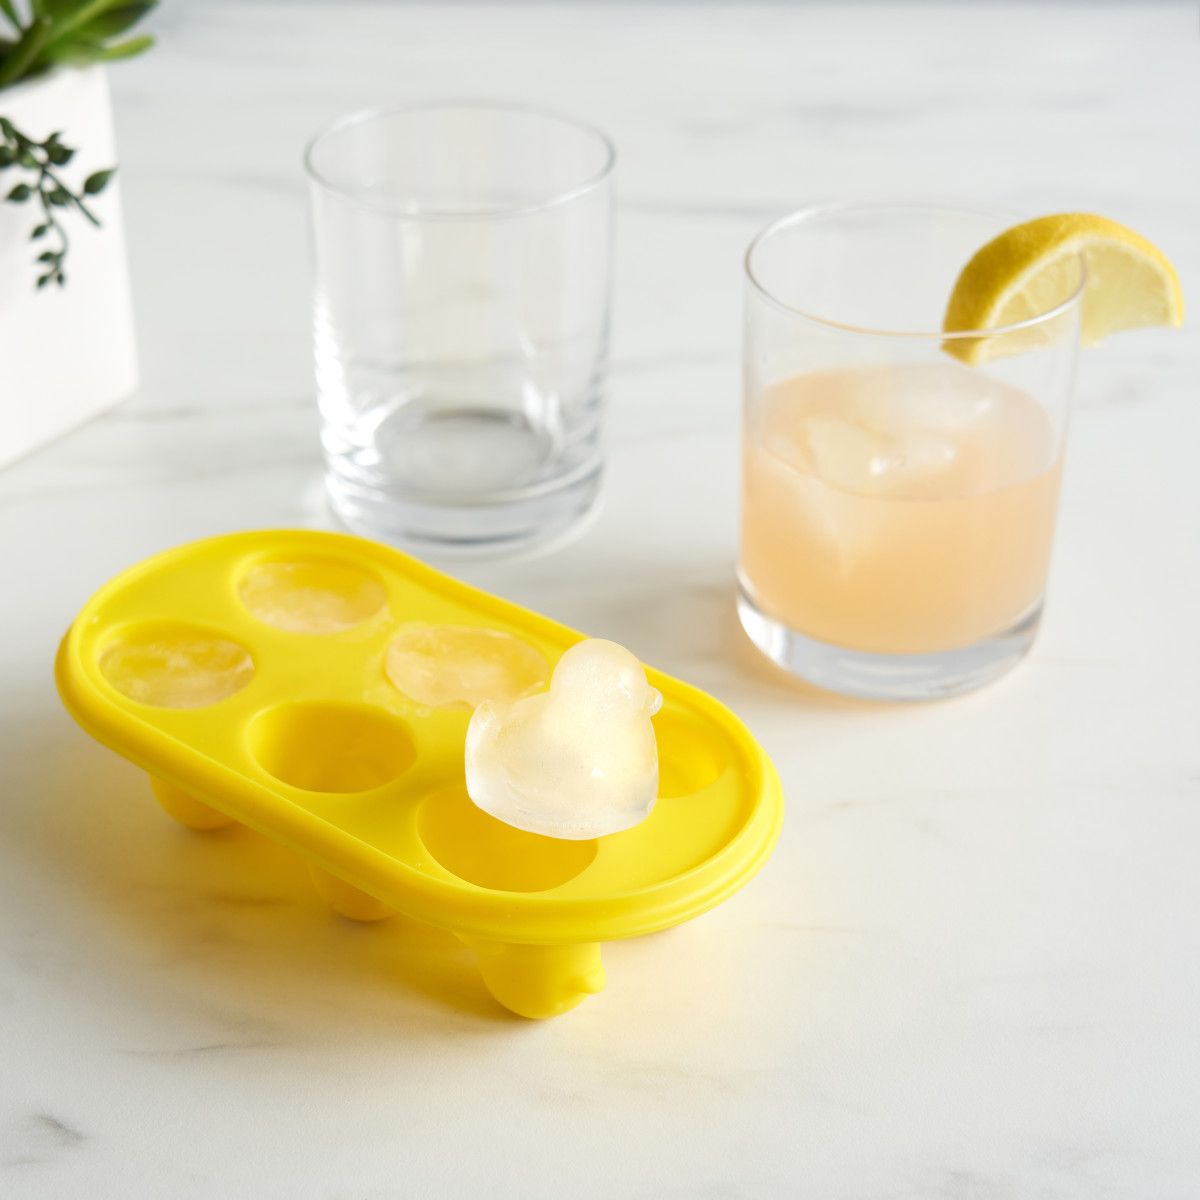 Black Duck Brand Holiday/Christmas Shaped Silicone Ice Cube Trays